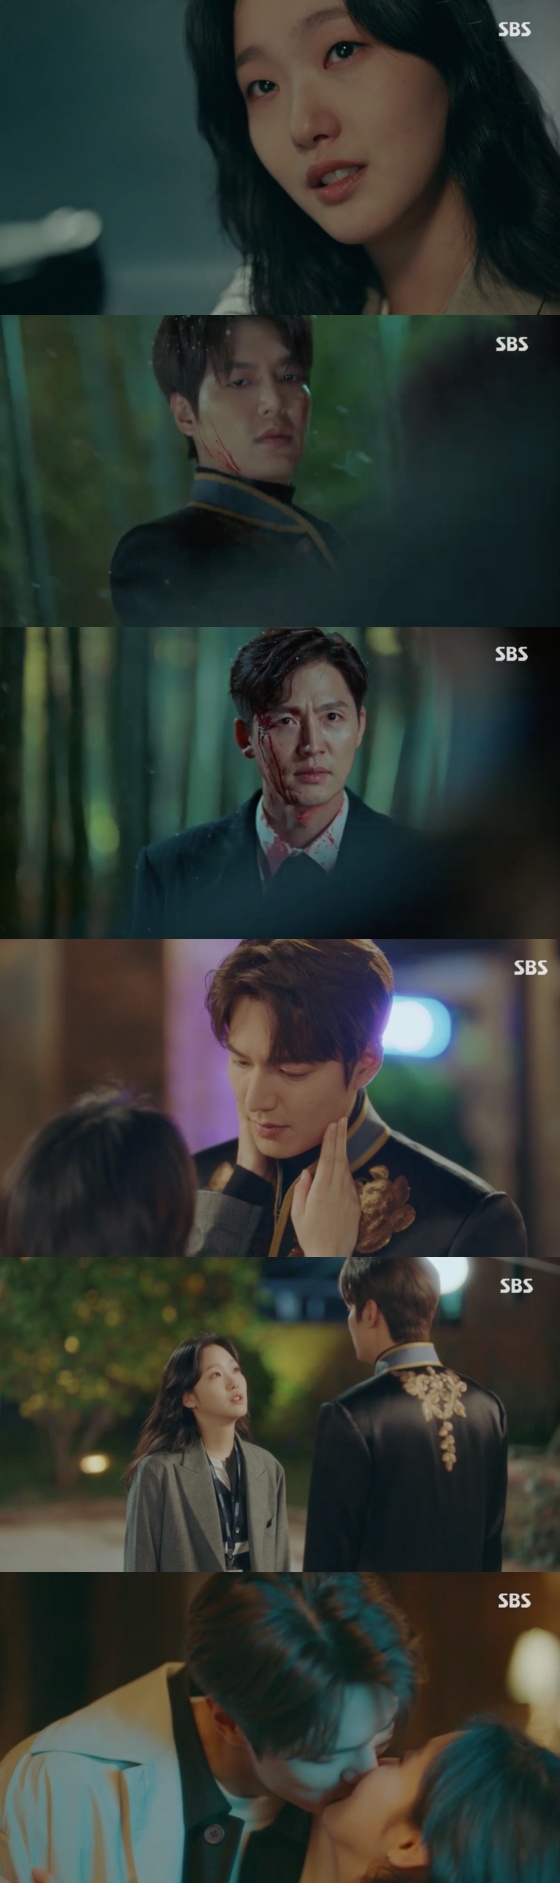 The SBS gilt drama The King - The Lord of Eternity, which was broadcast on the 12th, featured a scene in which Jung Tae-eul (Kim Go-eun) and Lee Min-ho together were playing Lee Jung-jin.On this day, Jung Tae-eul encountered Lee-rim. Jung Tae-eul put Lee-rim into space-time with a gun at his head.Irim threatened, If your nephew returns the world, you will have no memory of this.Igon found Irim with the contrast. Irim fled the scene, but soon he was caught. Irim said, Who are you chasing me?Why are you holding a sword? Igon said, I am an emperor and the sword is mine.Lee soon recognized Lee. Lee said, I behead the reverse.Jung Tae-eul returned to Korea with Irims Bill Viola: The Passing. Jung Tae-eul, who was alert, was saddened by the fact that he had no Igon.To Jeong Tae-eul, Why was it late? I had to bring Young-yi back to the station and find a way again, so I was late to open the door of the whole universe.I thought I could not remember if I found it. Jung Tae-eun replied, But did you find me? I wanted to see you forget me. I tried to tell you again if I forgot. I am the emperor of the Korean Empire.But how did you remember that when the two worlds flowed differently? Jung Tae-eun replied, I have missed that. I have had a lot of things. I havent even said this yet. I love you. You love me so much, confessed Jeong Tae-eul. This is how its done.I love you too much, he said.